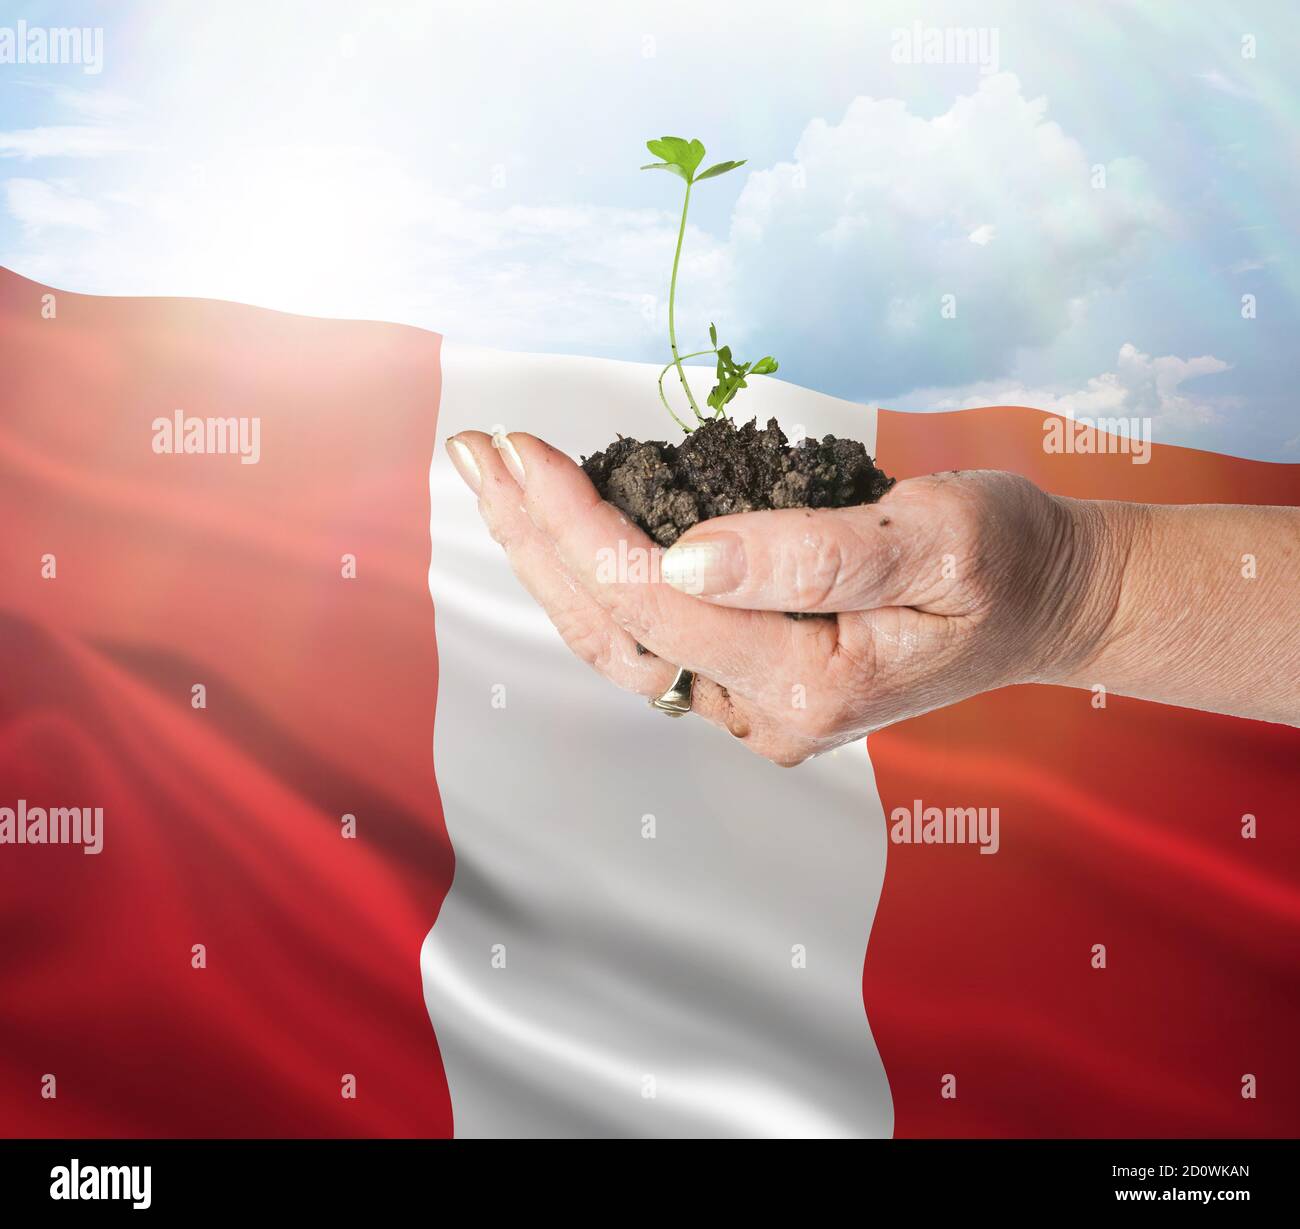 Peru growth and new beginning. Green renewable energy and ecology concept. Hand holding young plant. Stock Photo